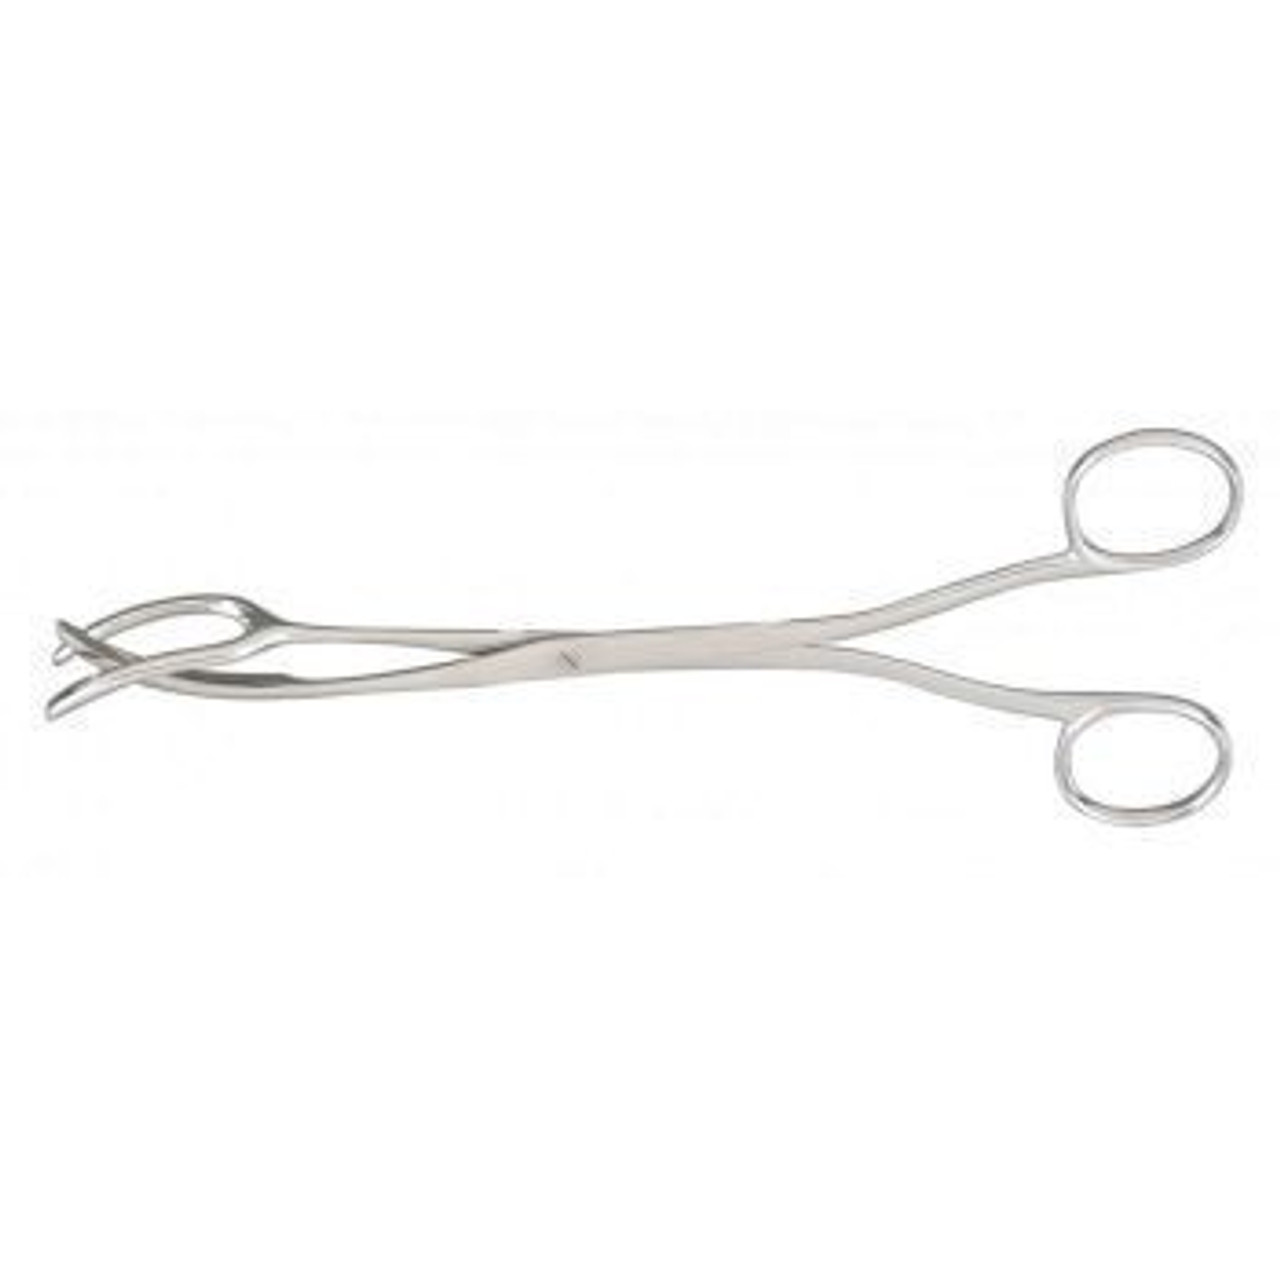 197-50-1300 FORCEPS FIRST AID 3.25in OBLIQUE && END 9cm